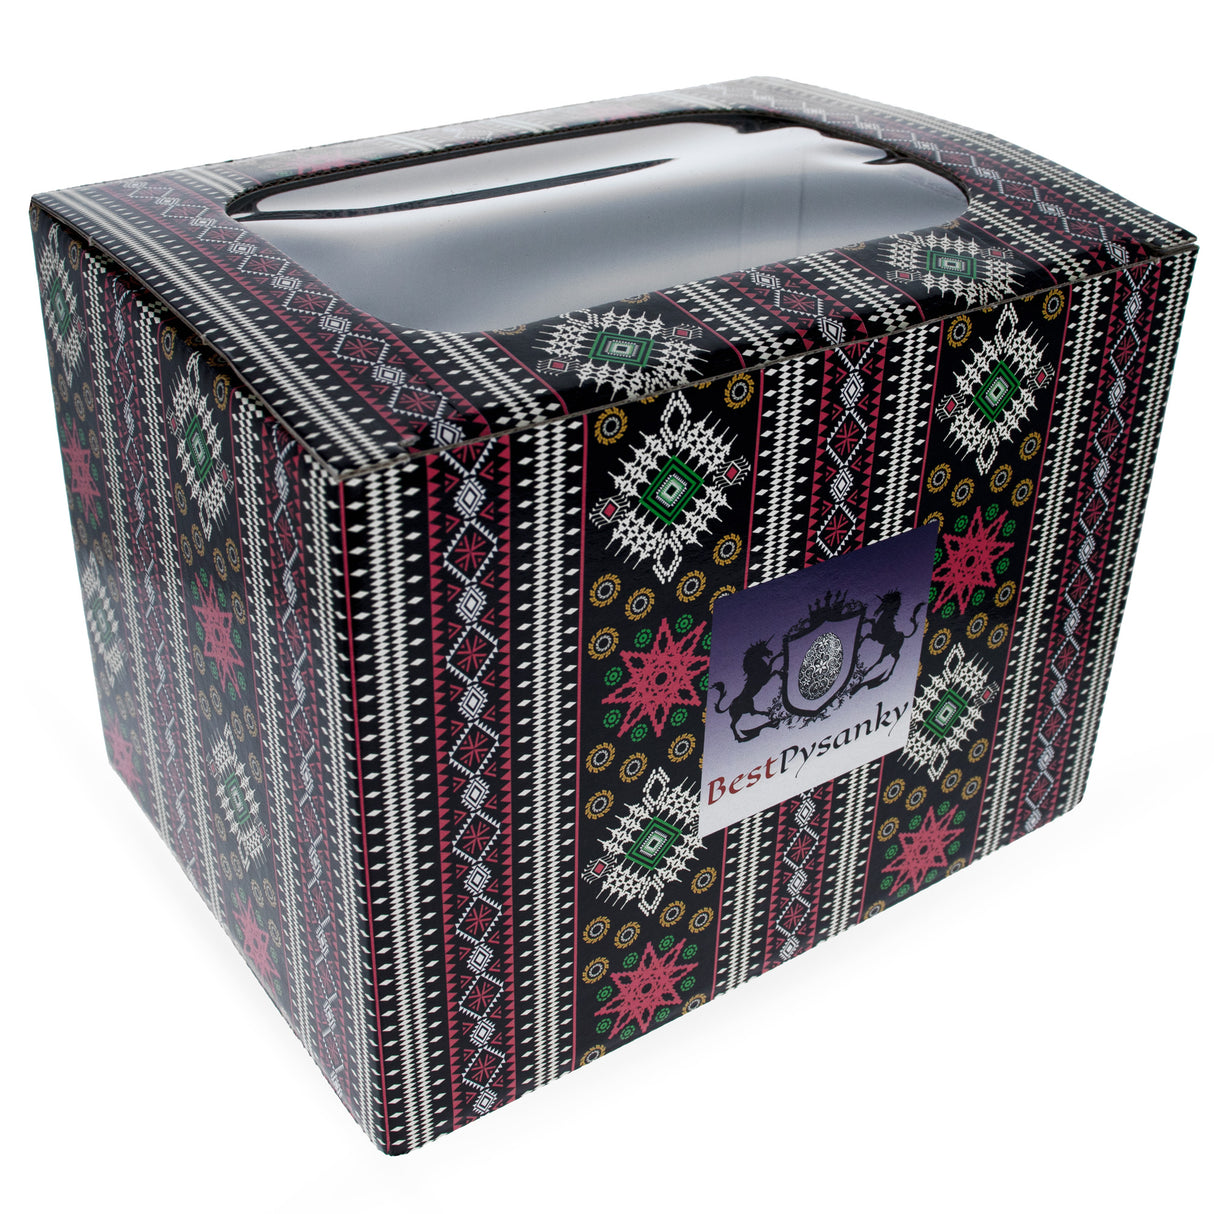 Geometric Design Ukrainian Gift Box with Display Window 7.1 x 5.5 x 5.5 Inches in Red color,  shape